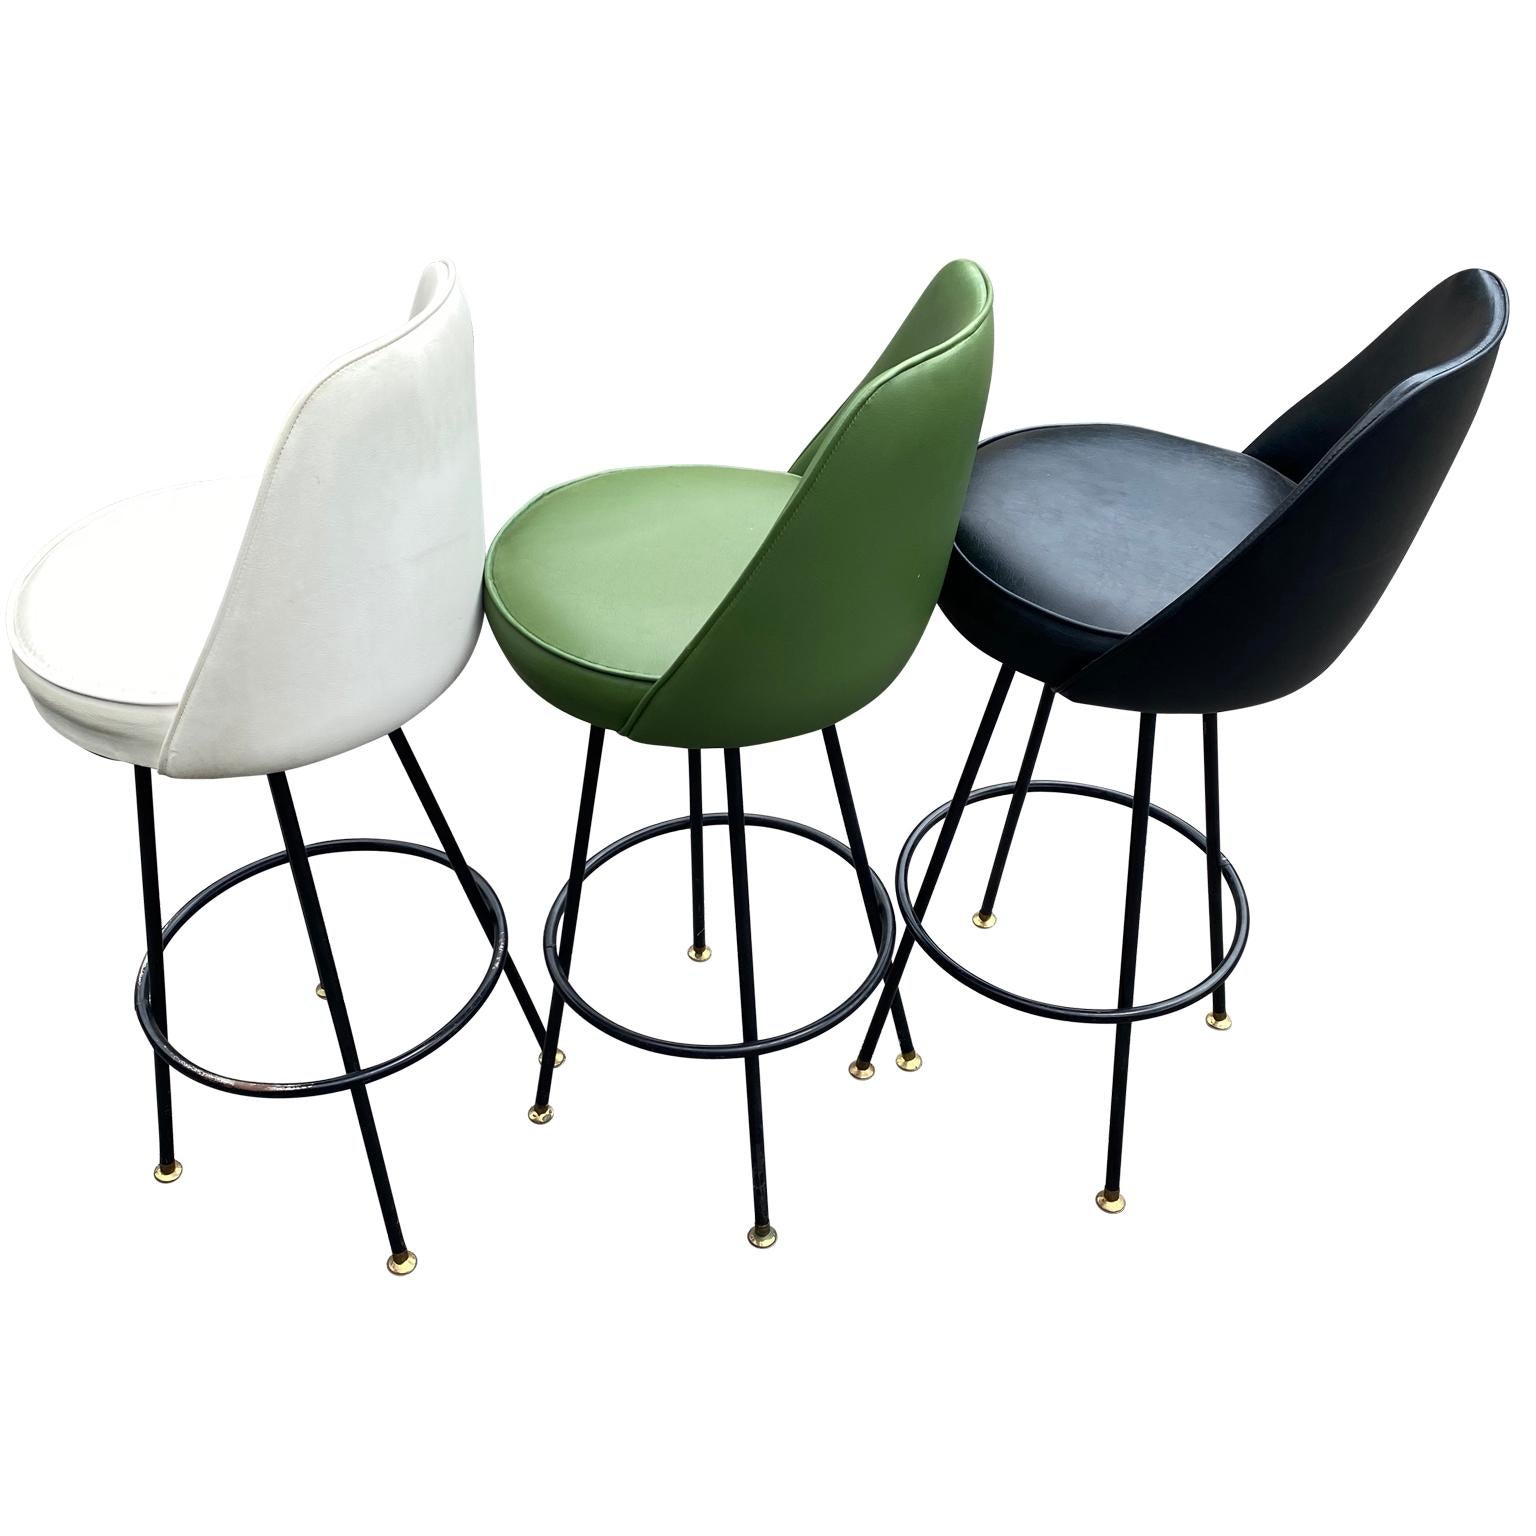 3 Mid-Century Modern swivel bar stools in period tri color vinyl upholstery.
 